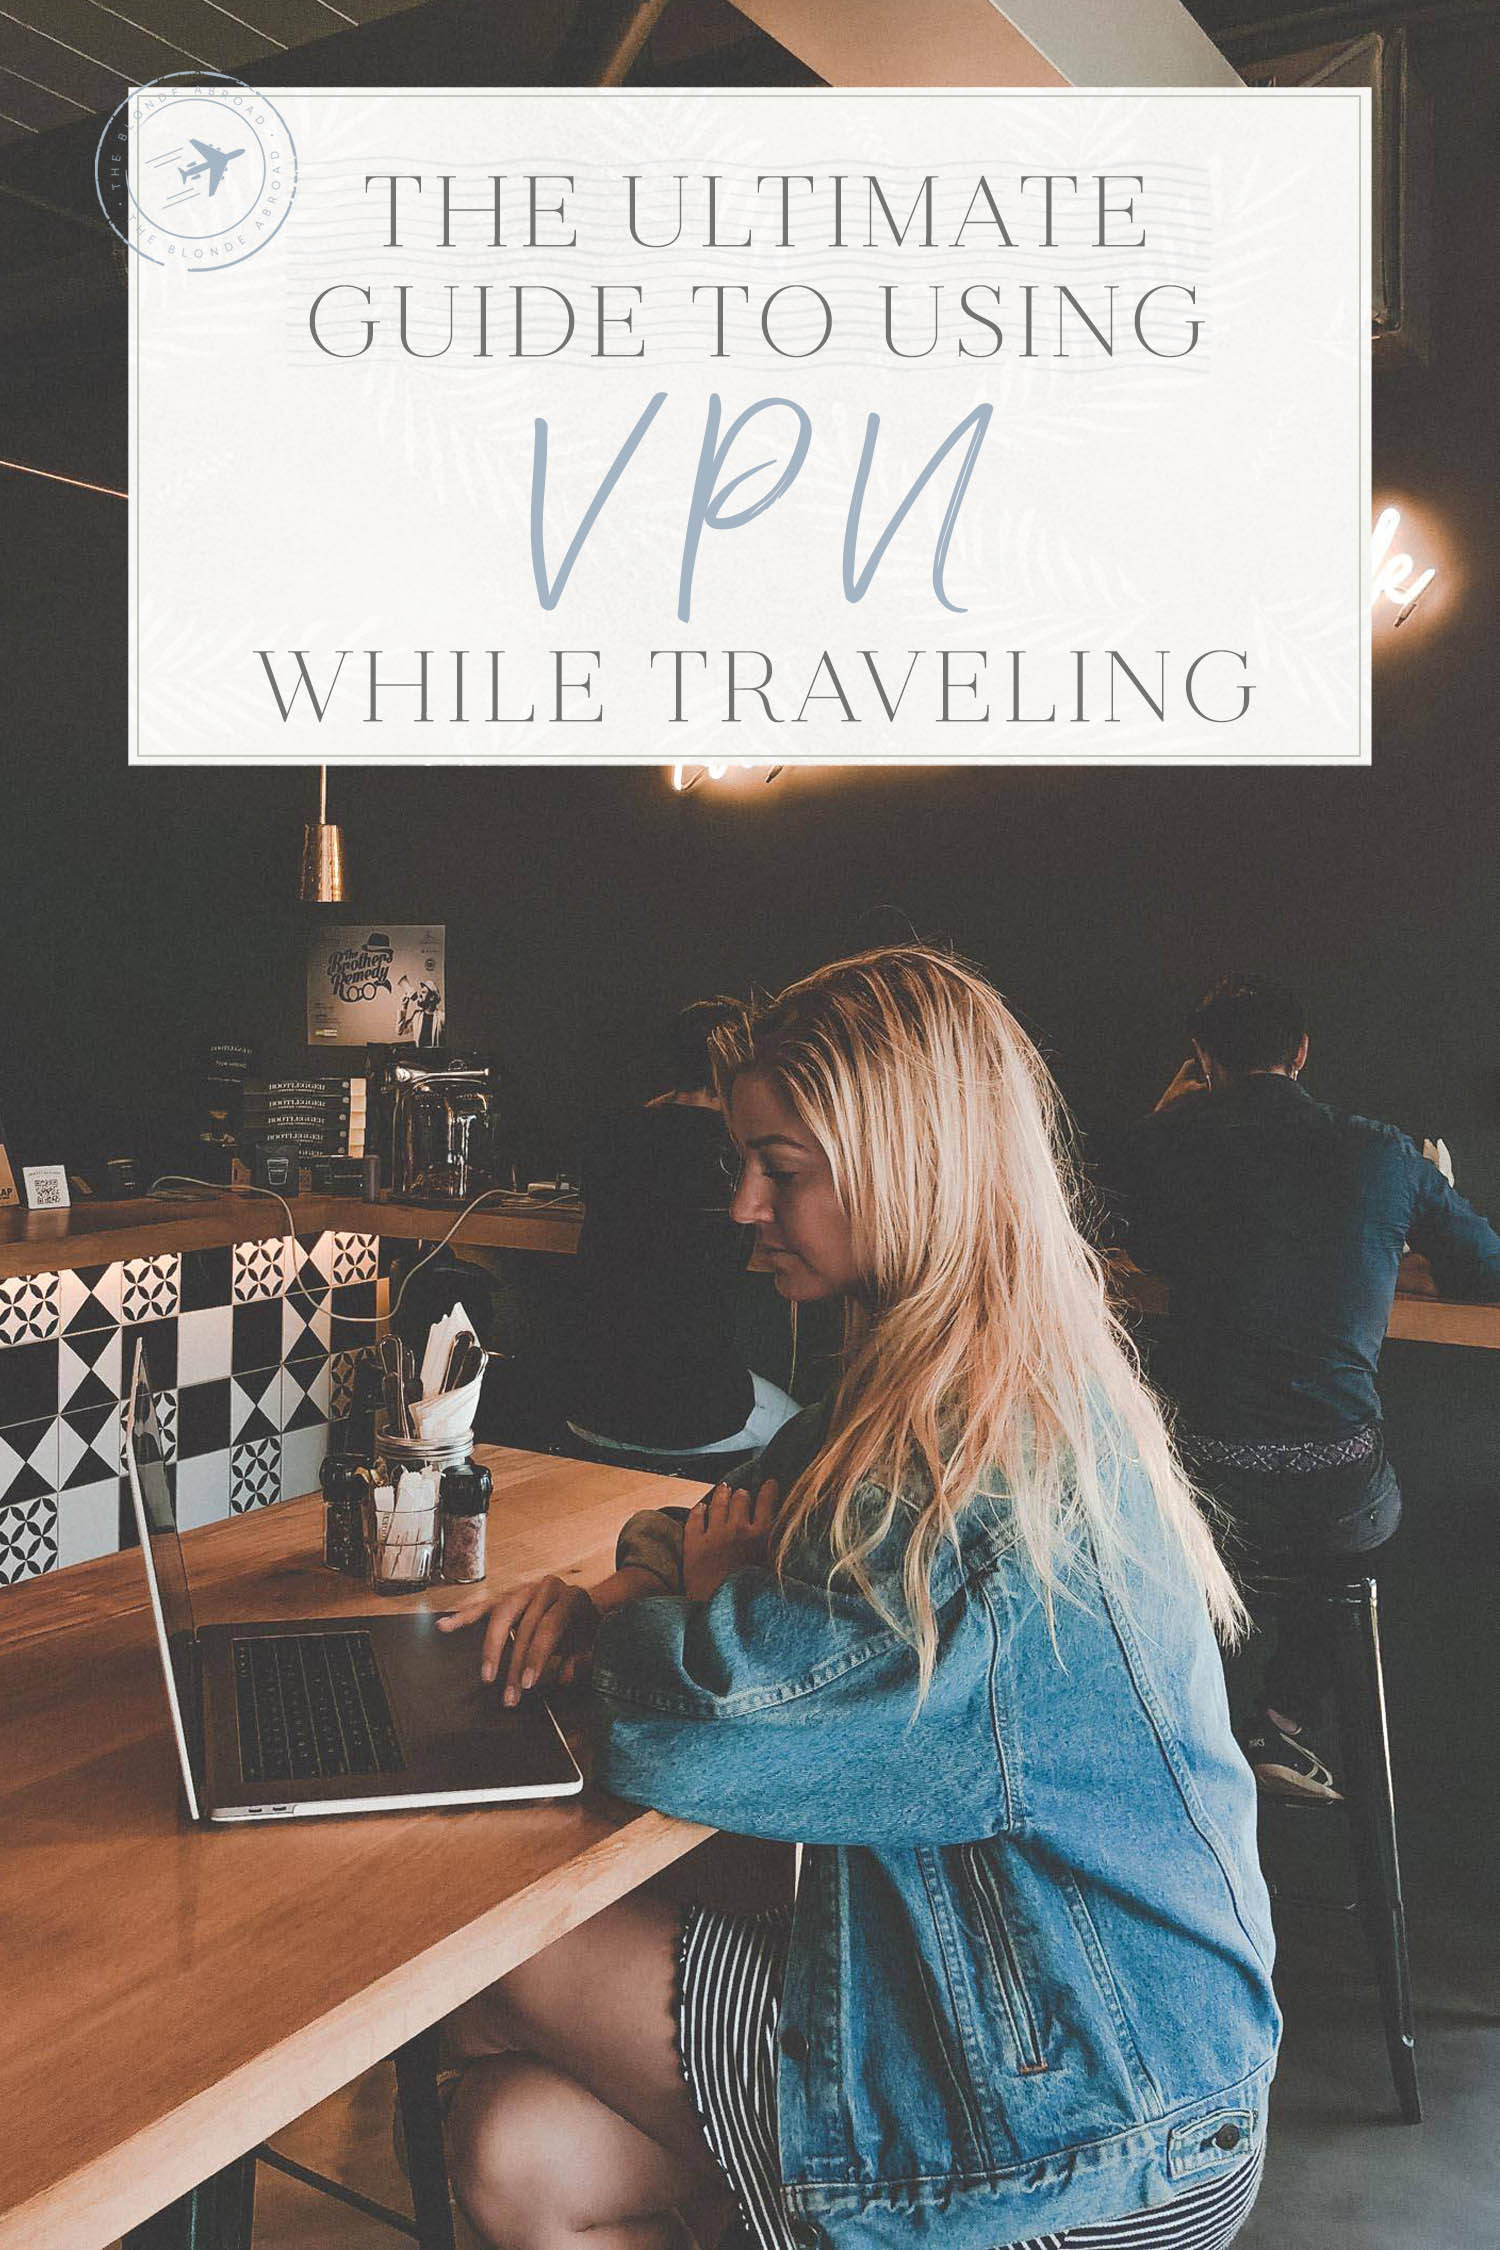 The Ultimate Guide to Using a VPN While Traveling